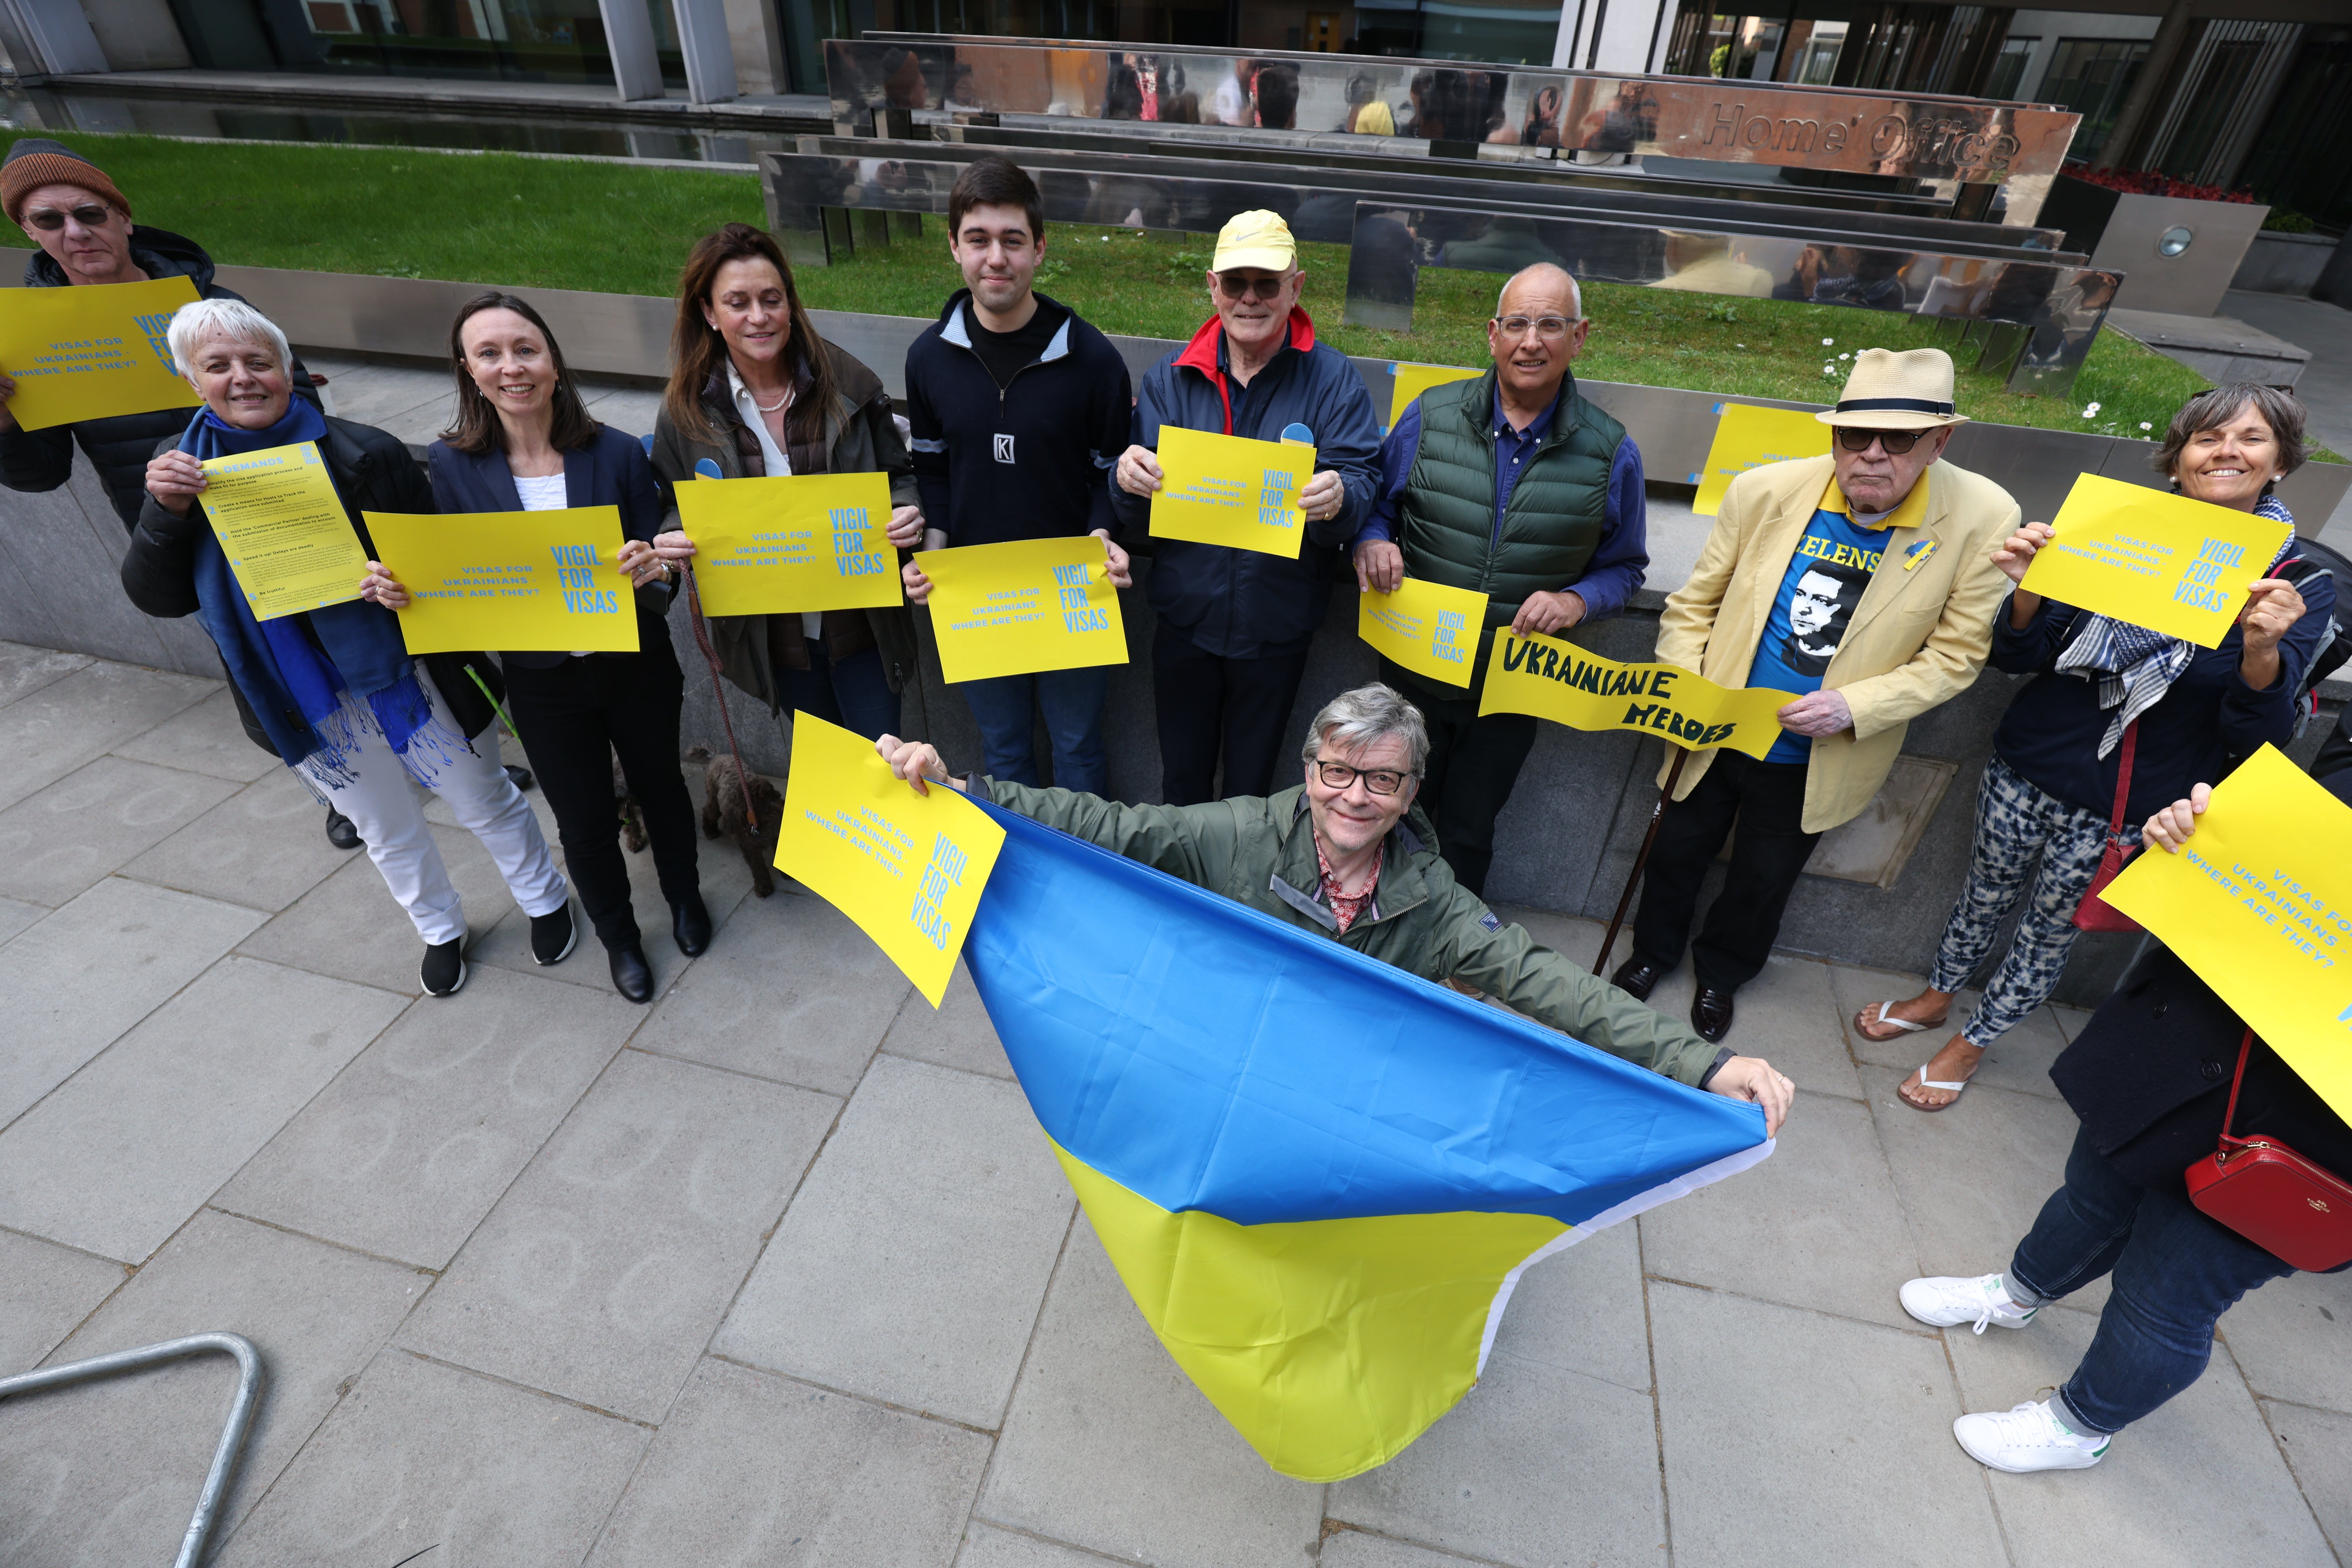 One in four Ukrainians who have applied under the Homes for Ukraine scheme have so far arrived in the UK